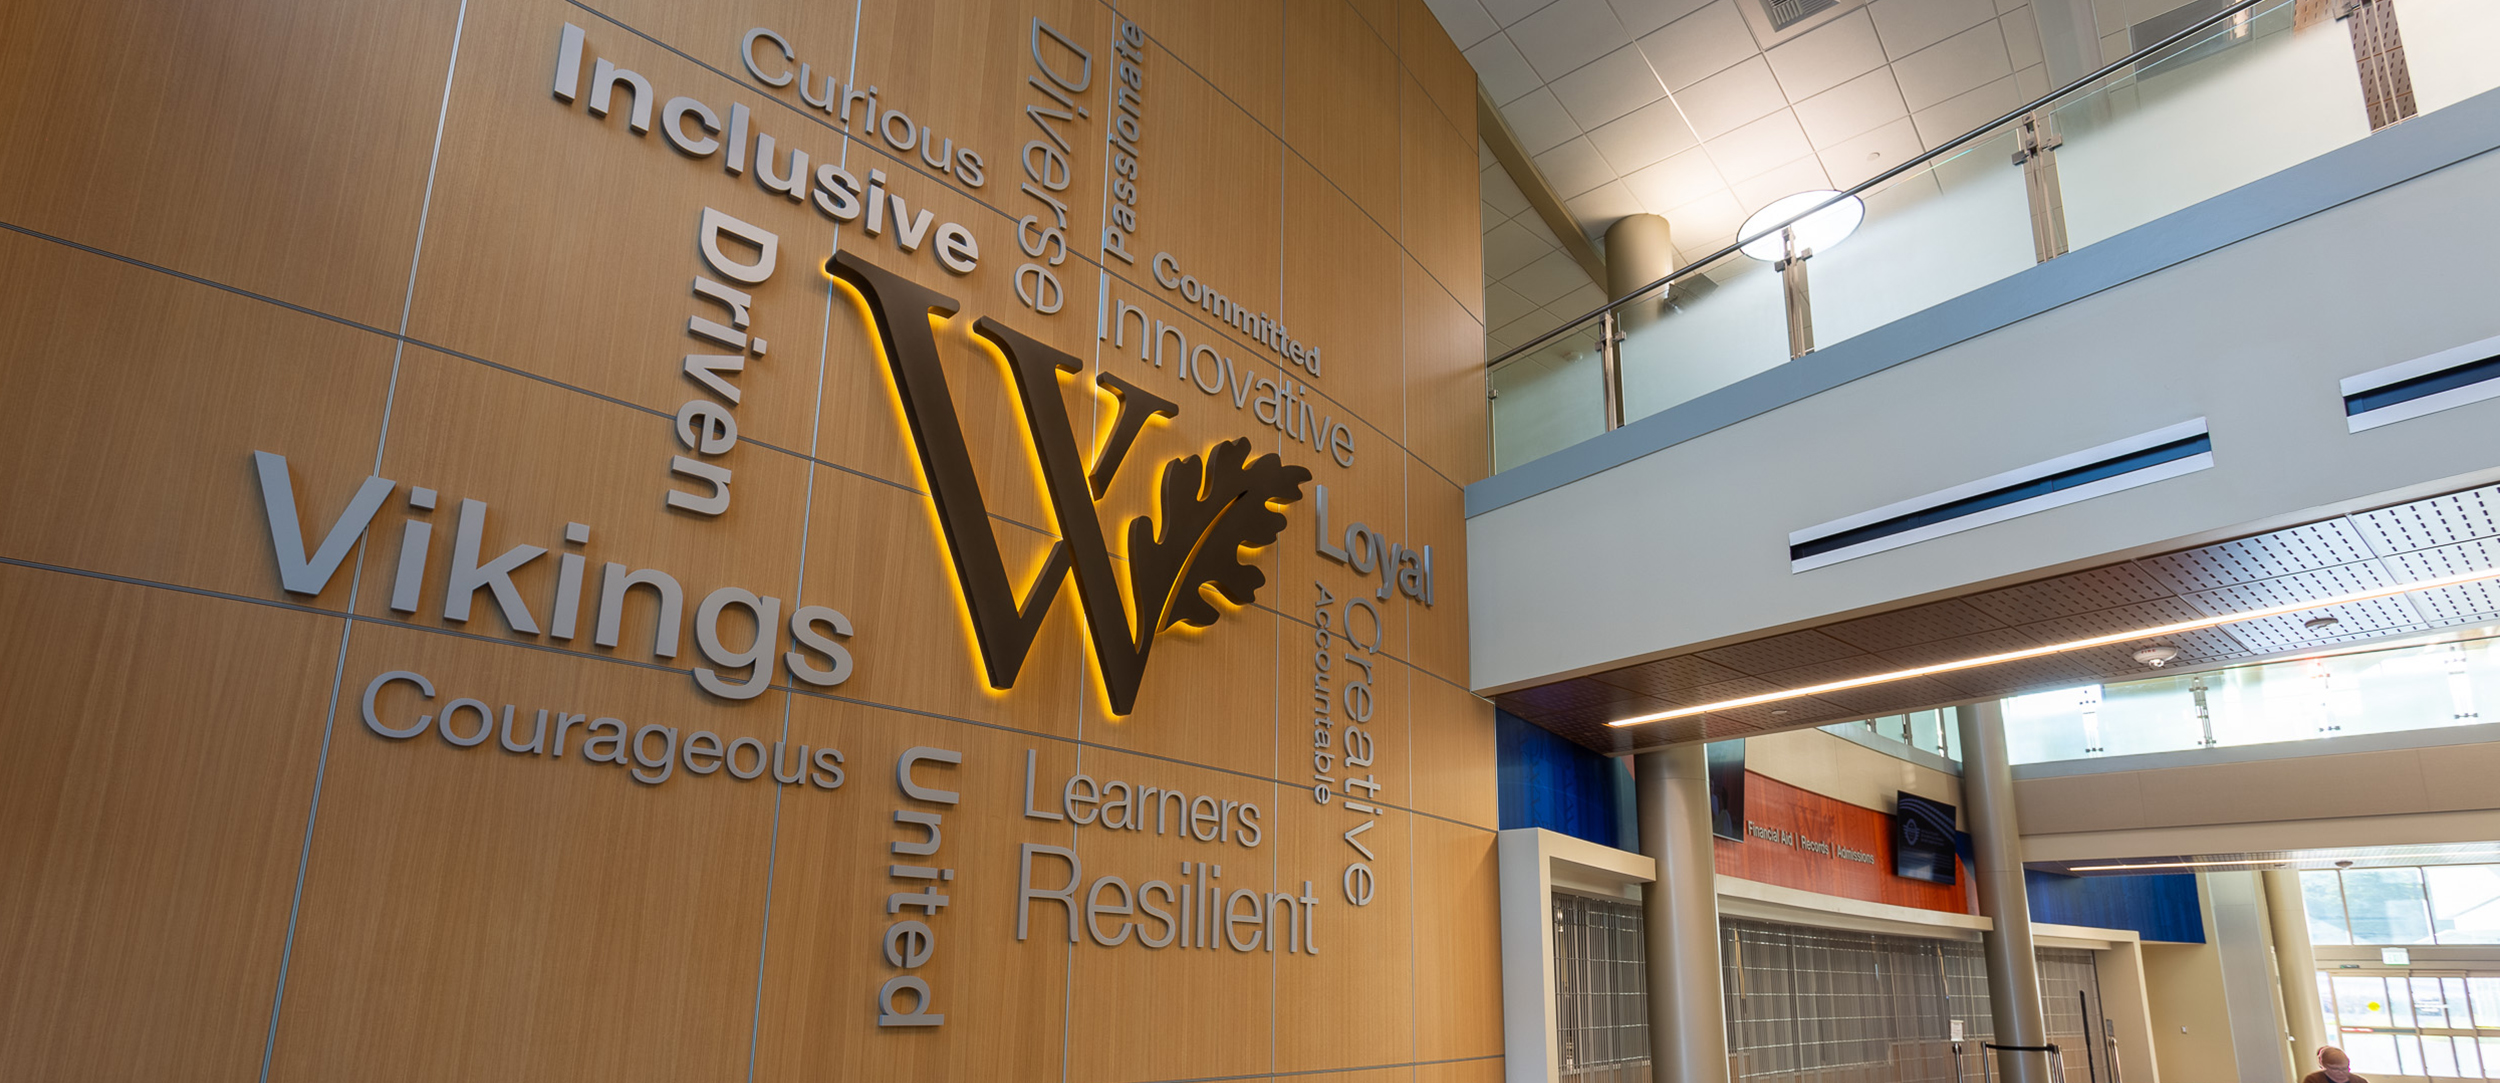 West Valley College Student Services Center Entrance Logo & Traits Feature Wall Dimensional Lettering